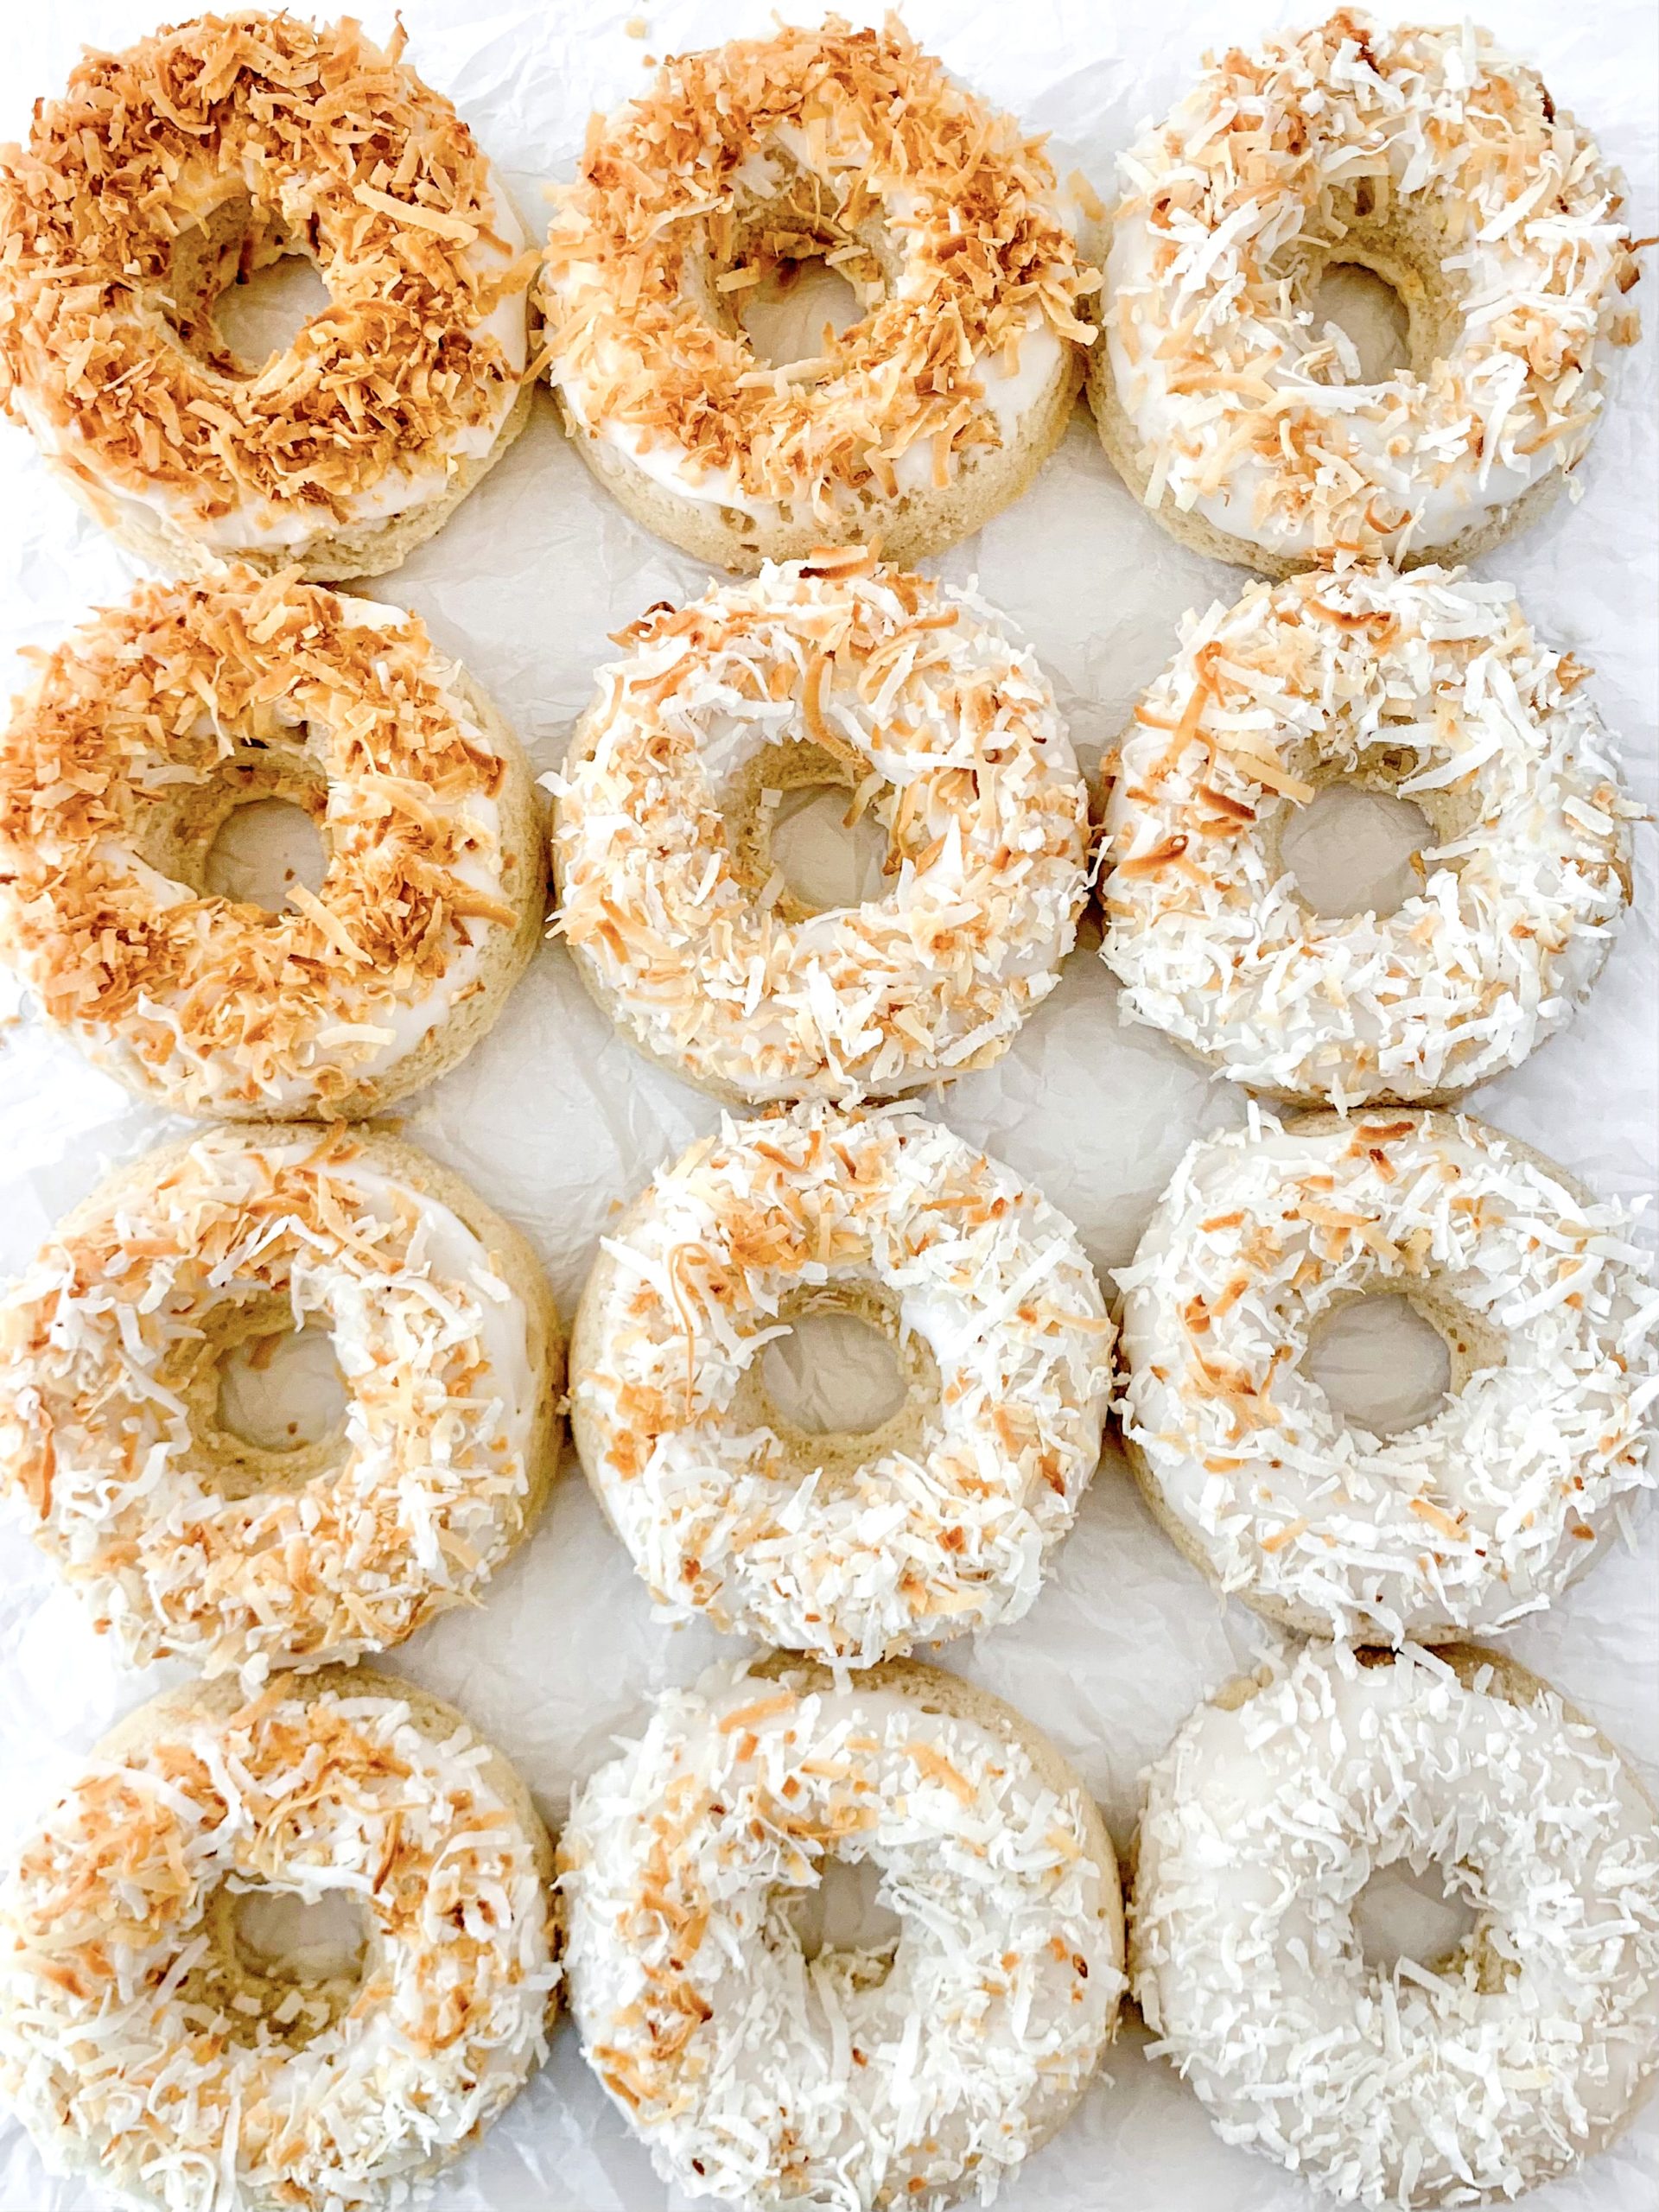 One dozen donuts arranged with a color gradient from dark brown toasted coconut flakes on top to white untoasted coconut flakes on top